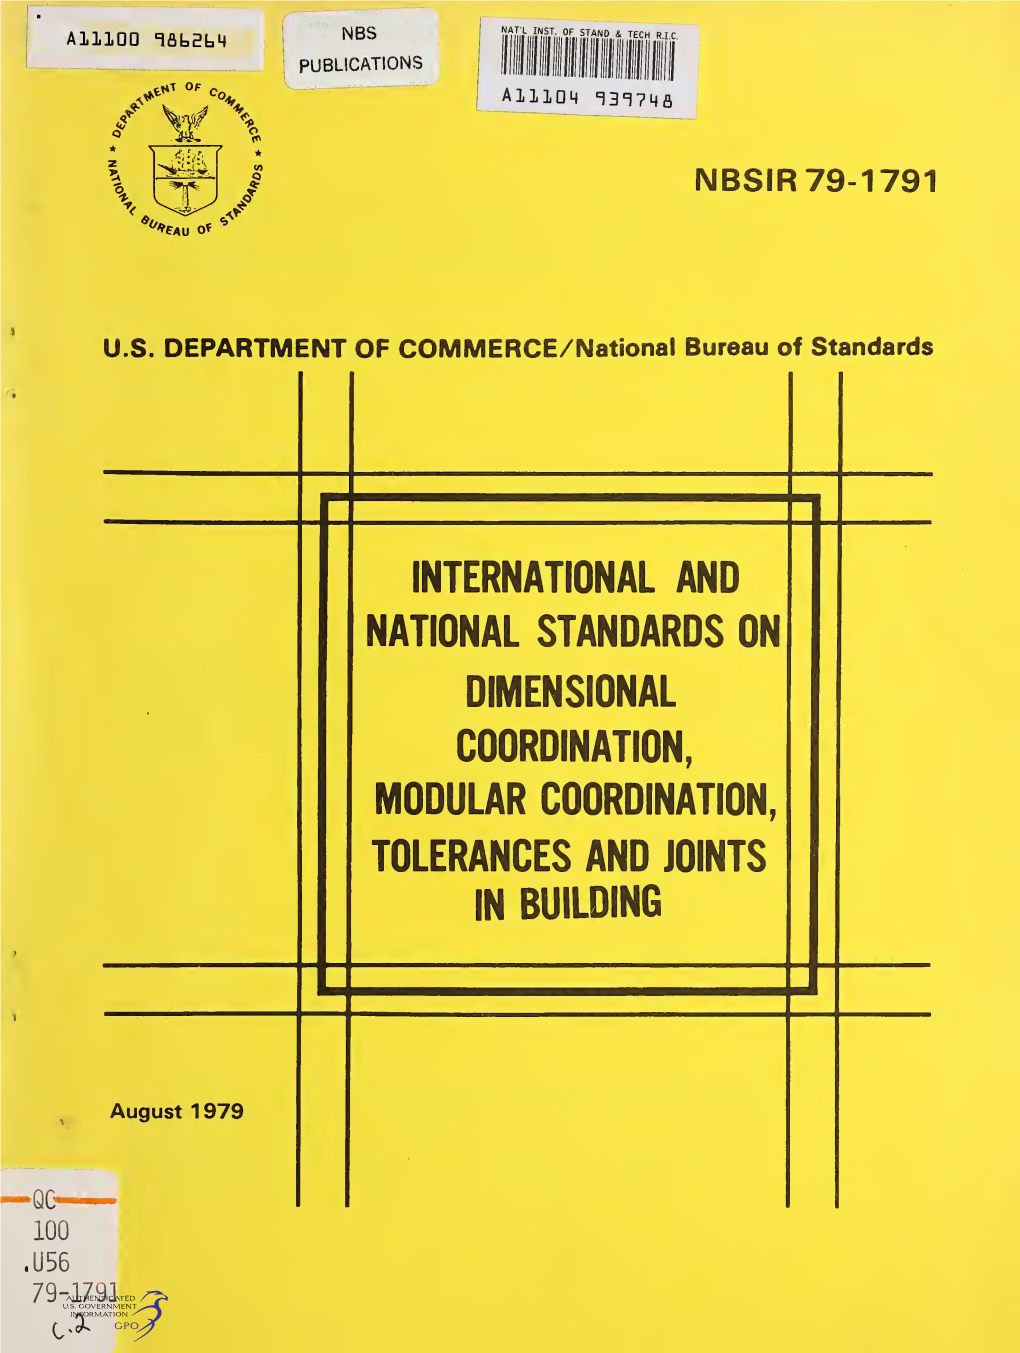 International and National Standards on Dimensional Coordination, Modular Coordination, Tolerances and Joints in Building